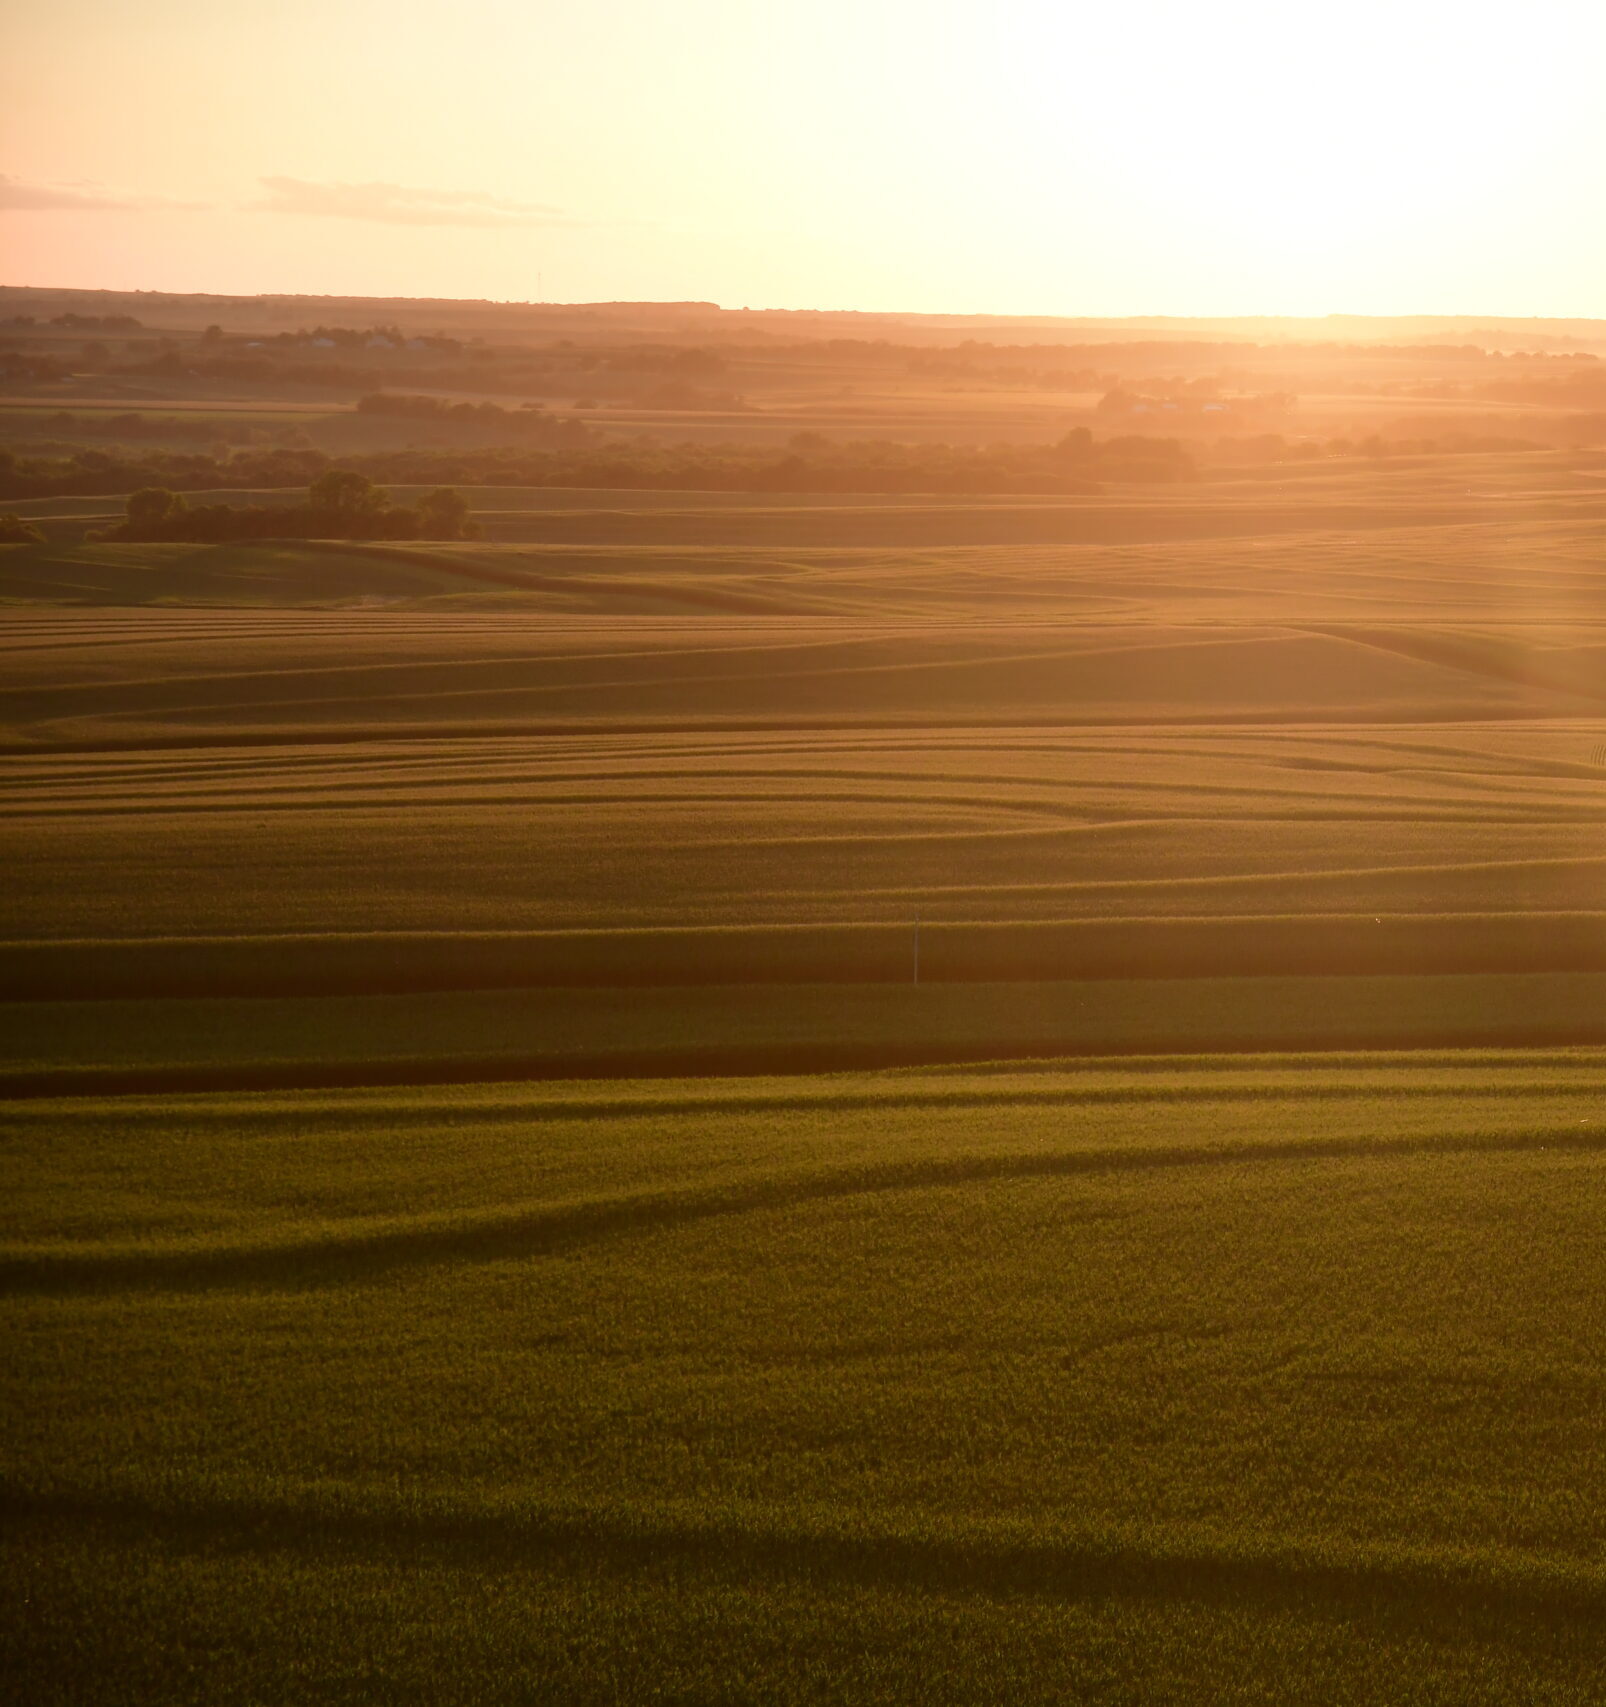 A sun peaks over the horizon of a flat, grassy field